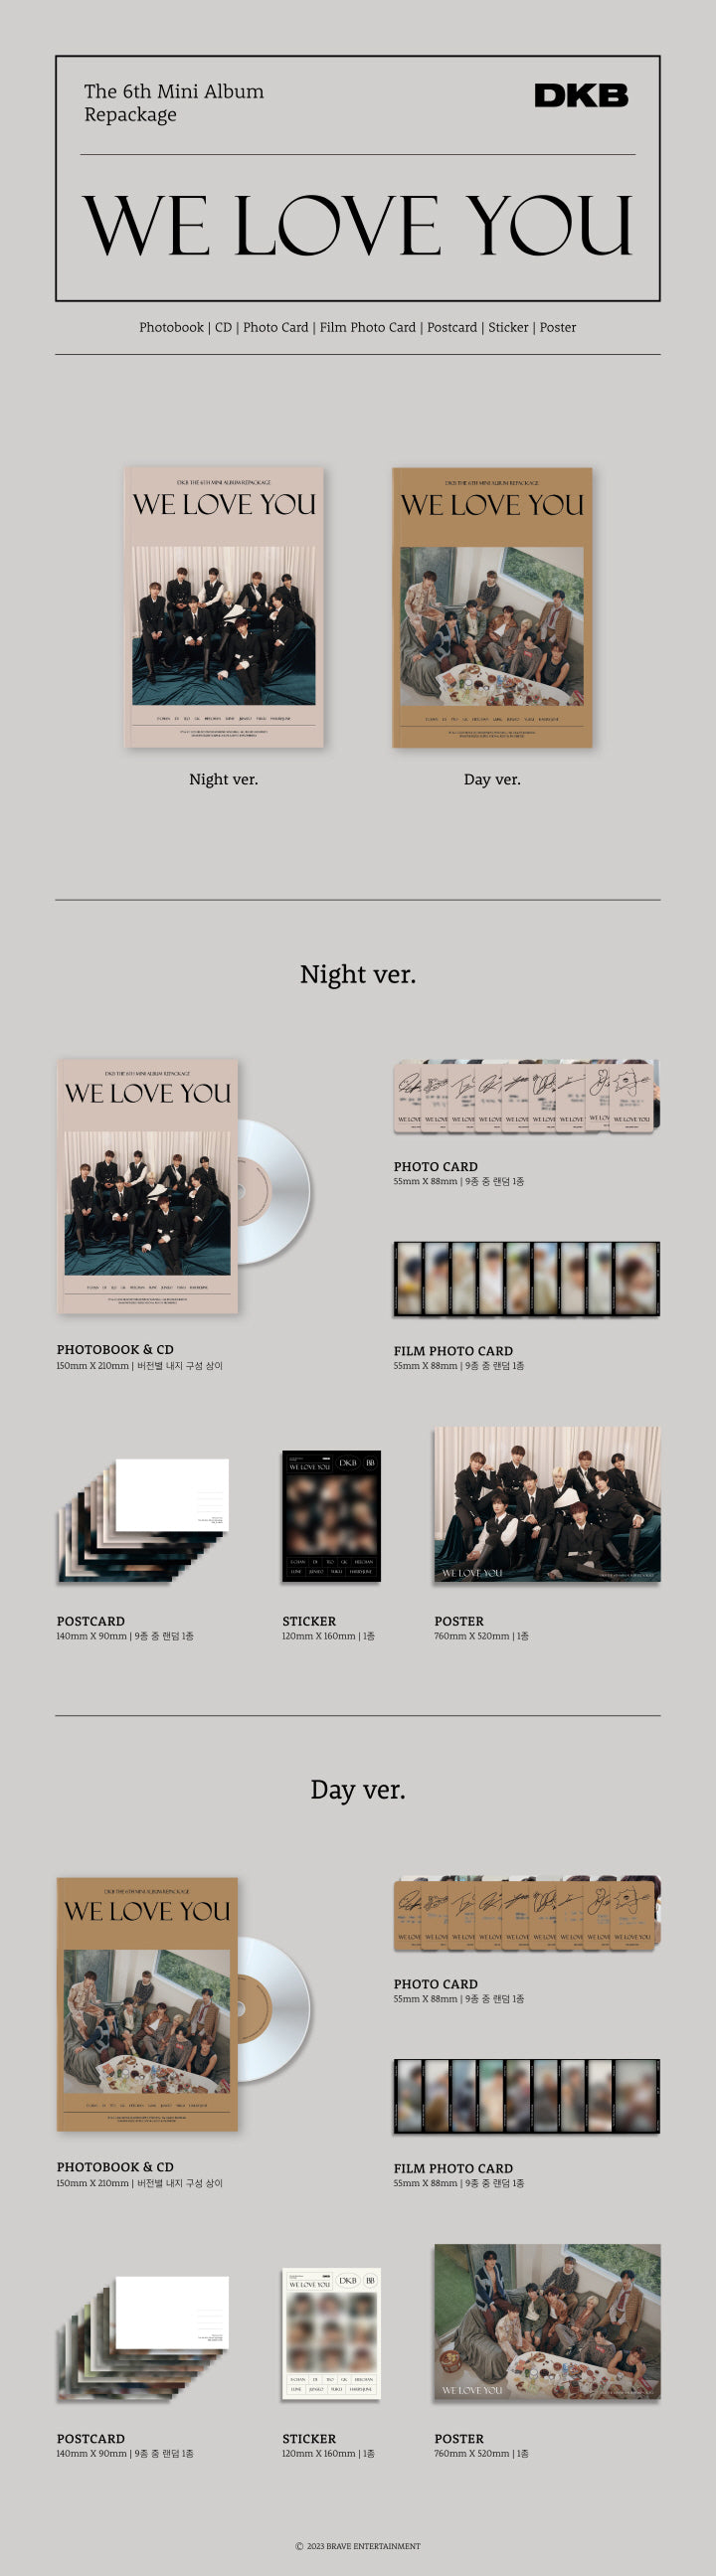 1 CD
1 Photo Book
1 Photo Card (random out of 9 types)
1 Film Photo Card (random out of 9 types)
1 Postcard (random out of...